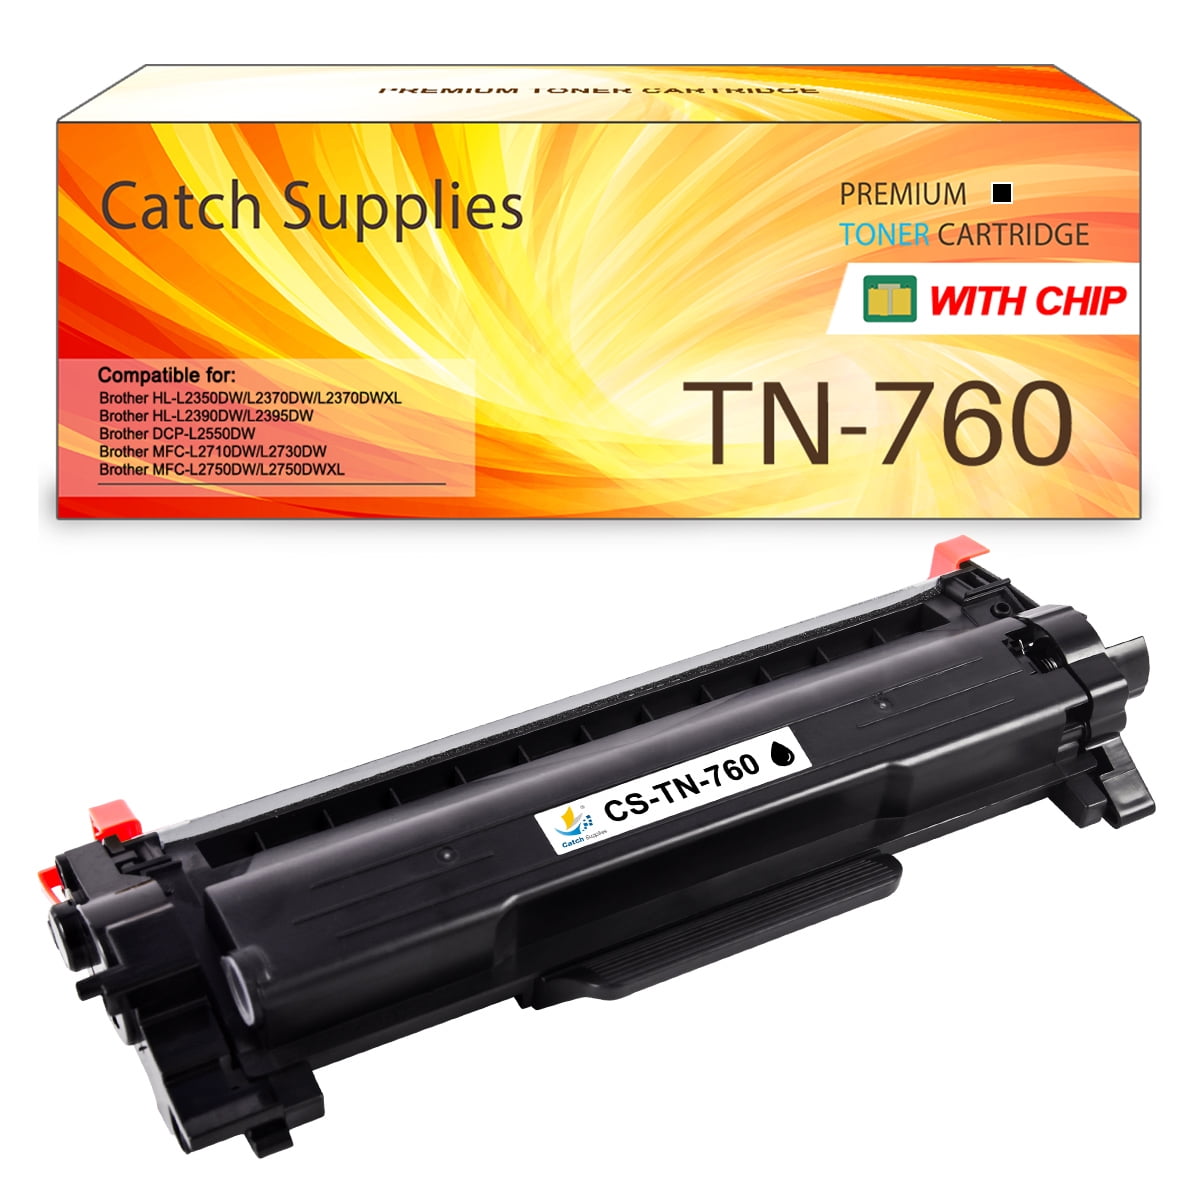 Catch Supplies Compatible Toner for Brother TN760 HL-L2350DW HL